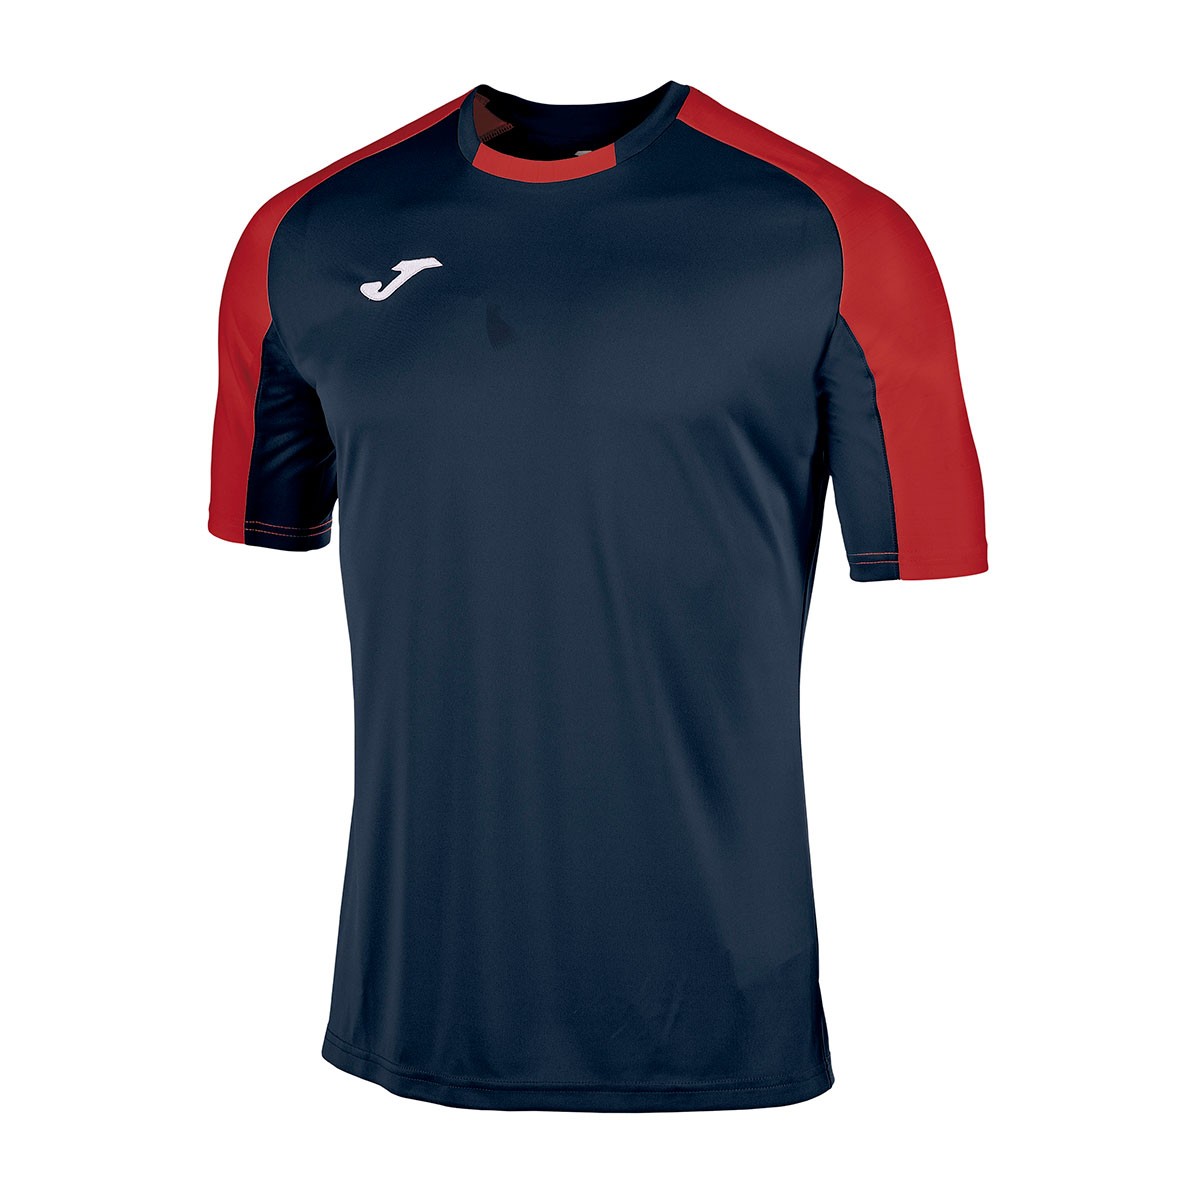 Jersey Joma Essential m/c Navy blue-Red 